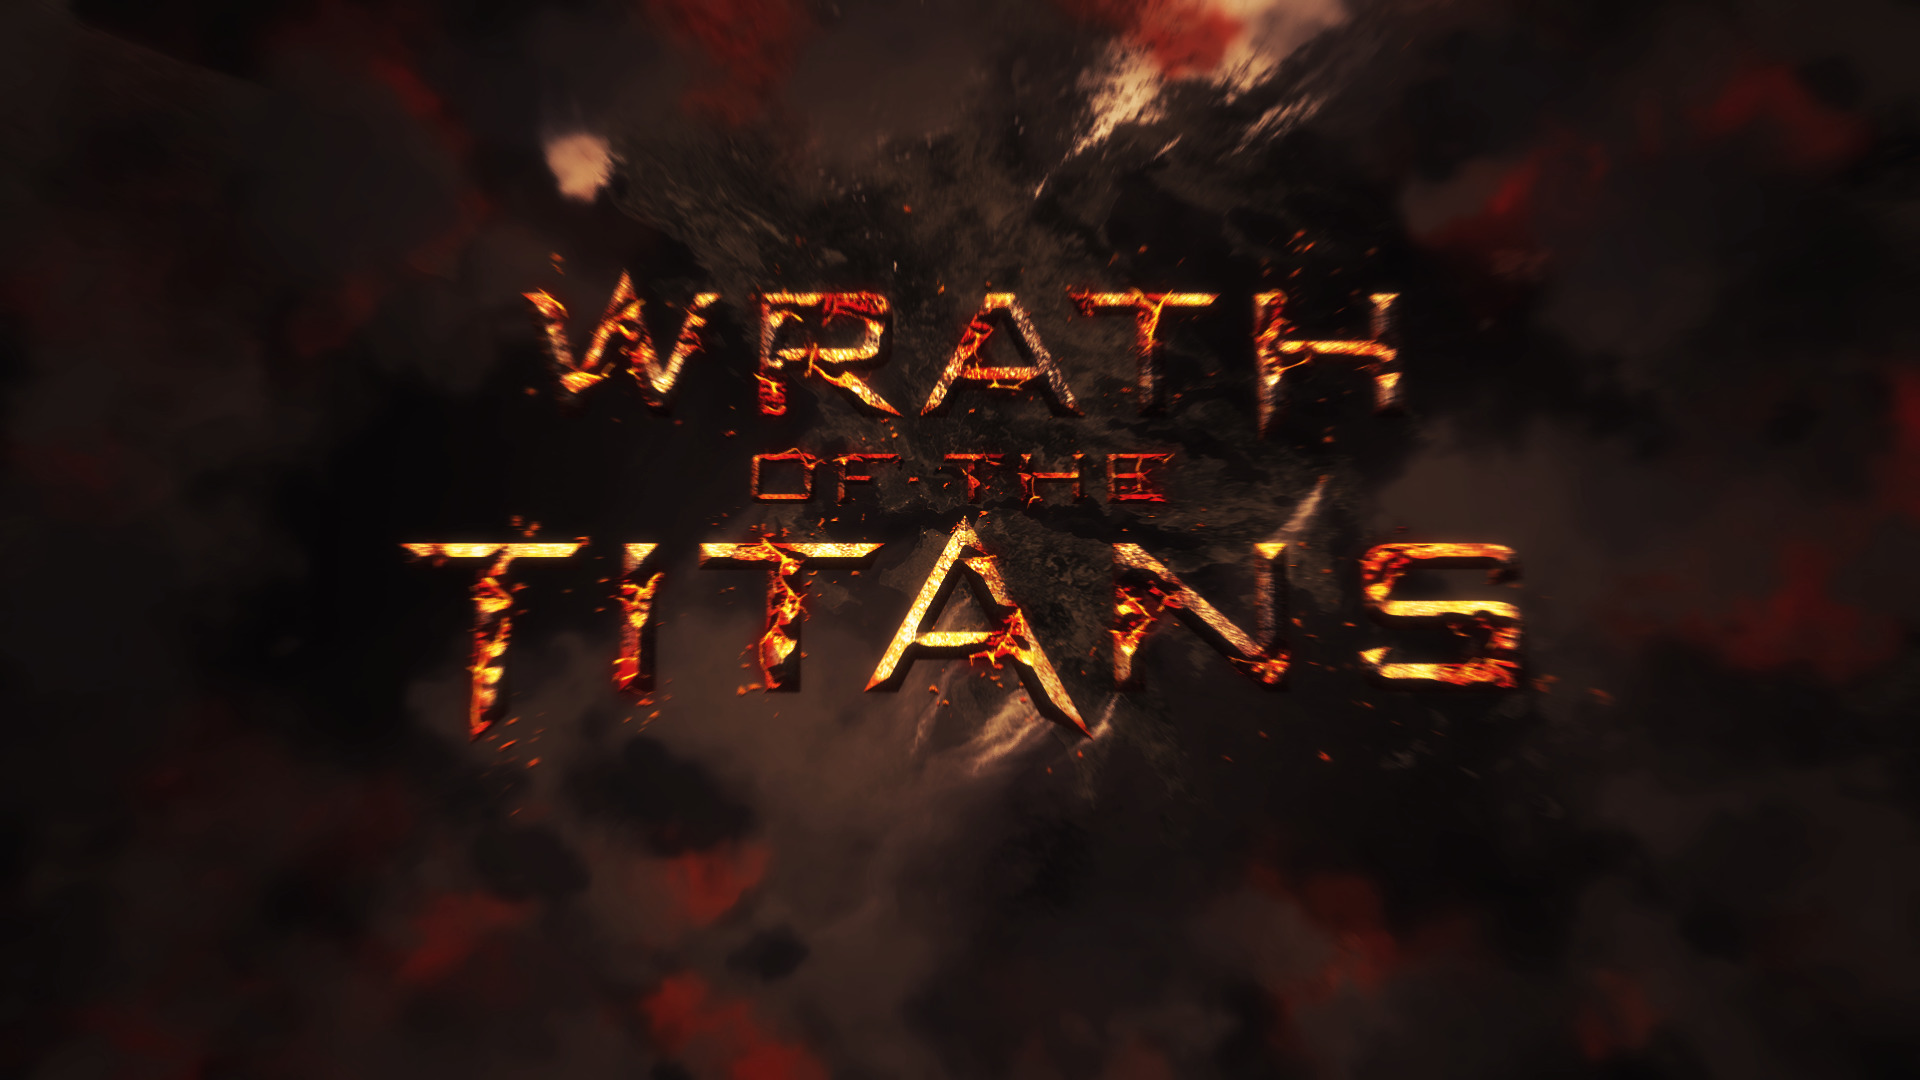 movies, Wrath Of The Titans Wallpapers HD / Desktop and Mobile Backgrounds